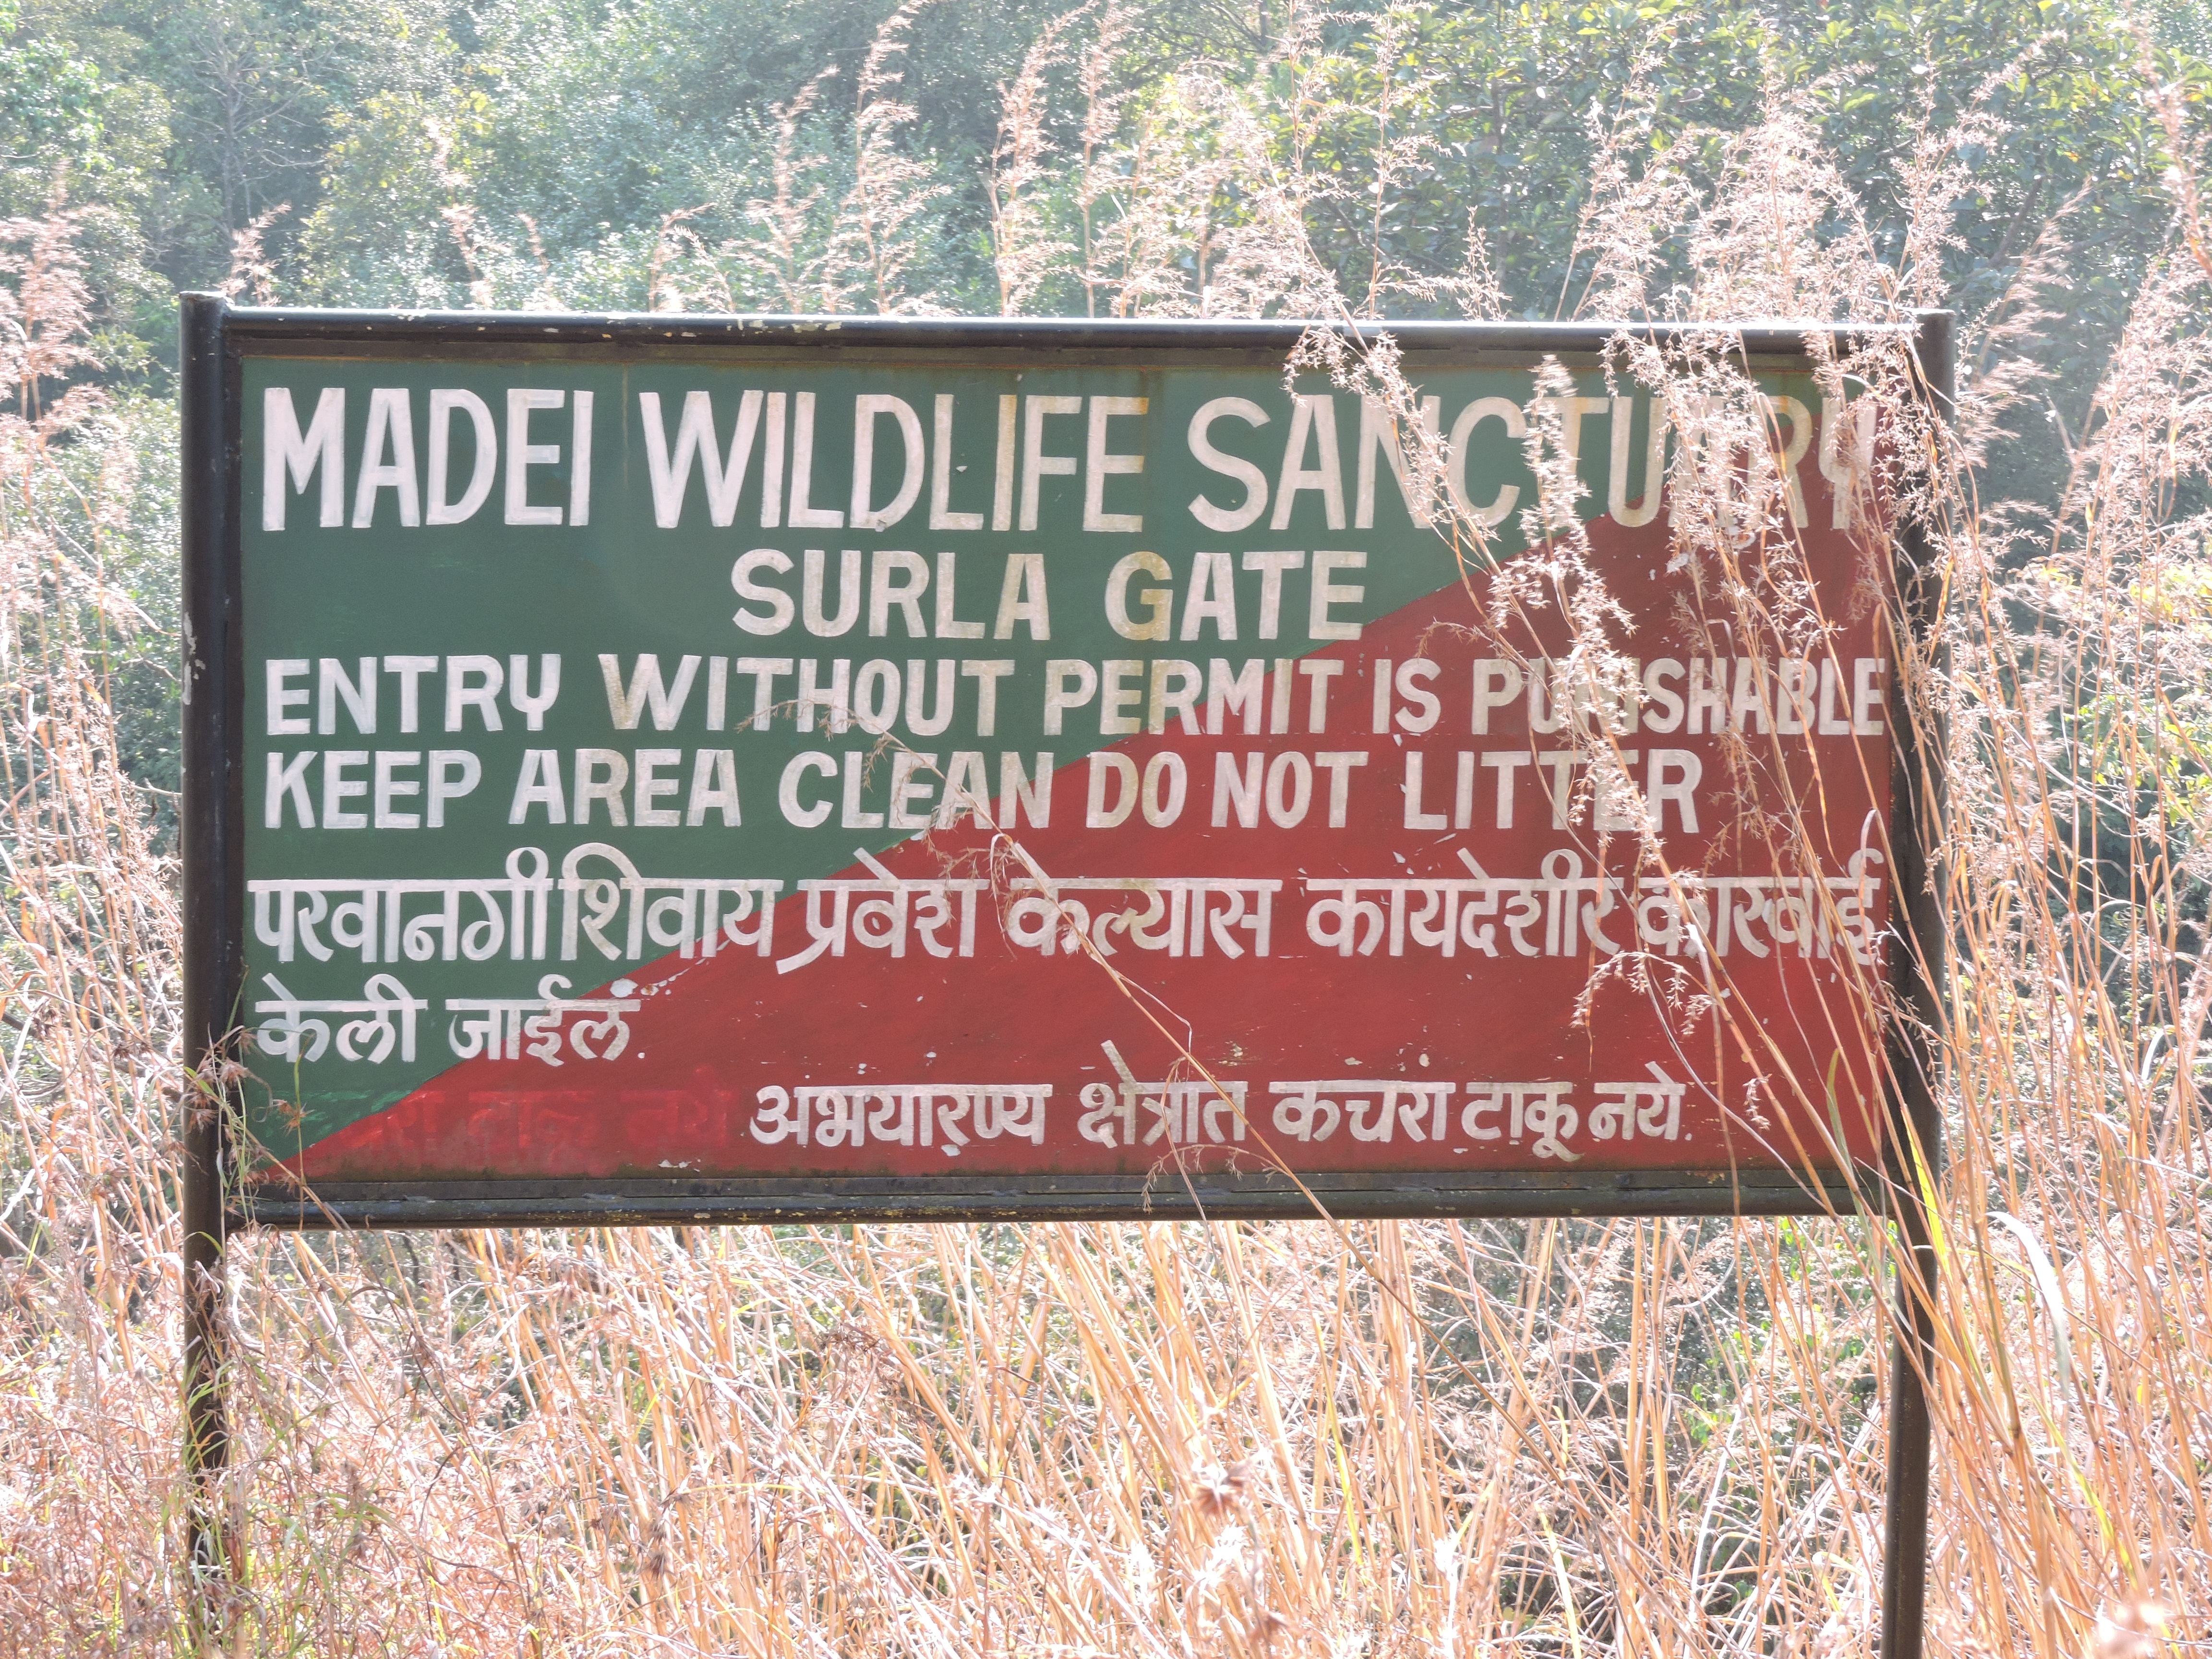 The wildlife sanctuary is a protected area in Goa and falls within the river basin.